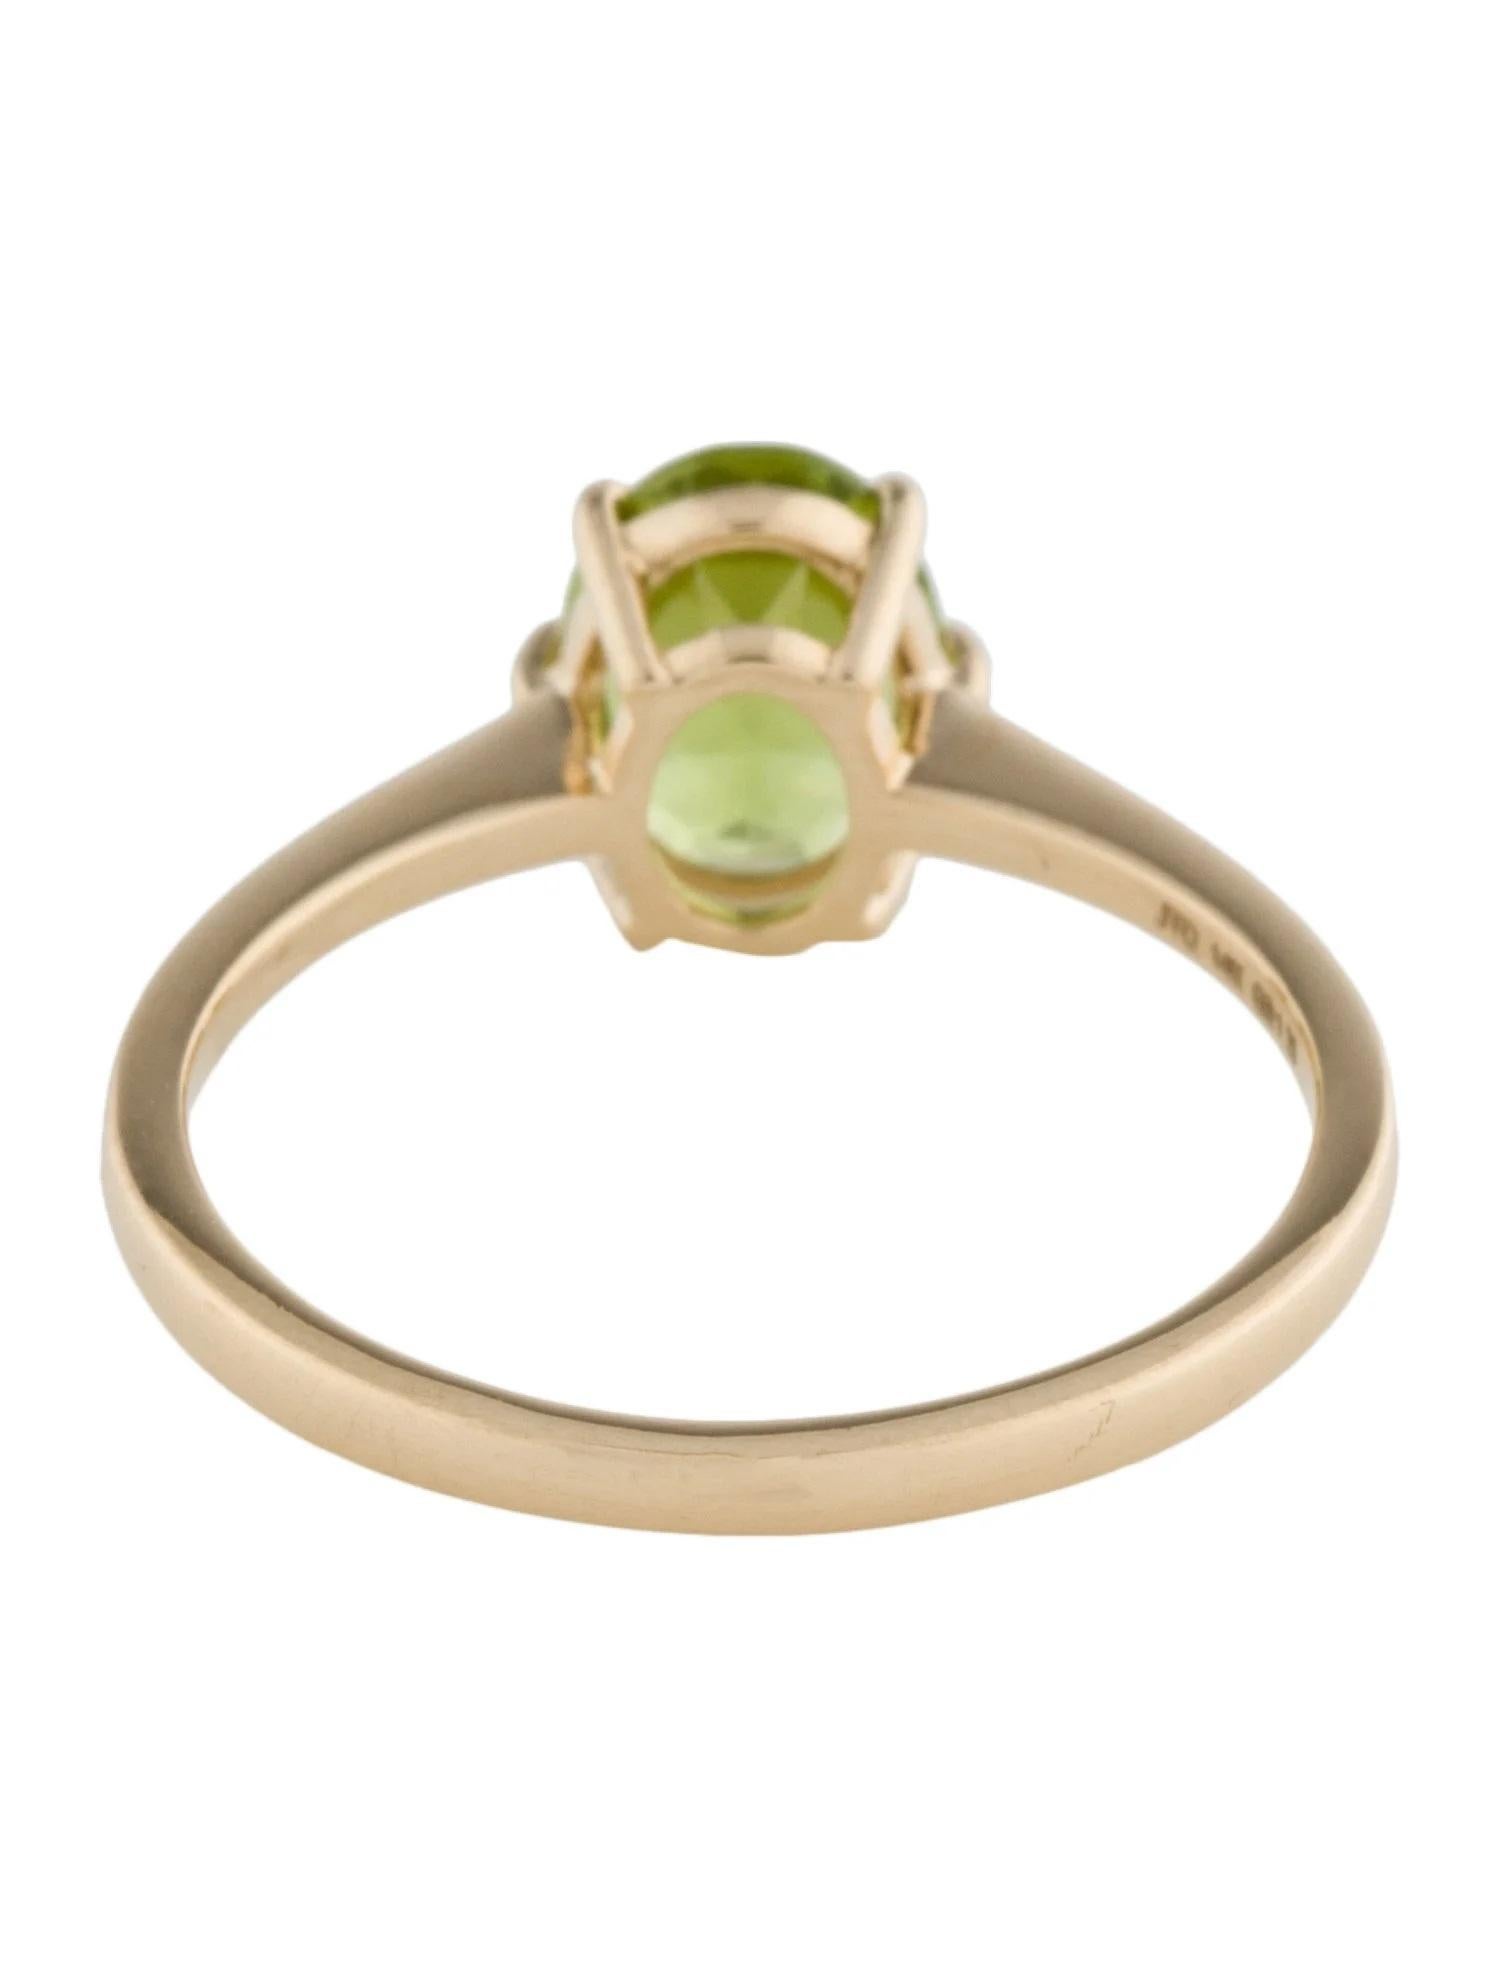 Oval Cut 14K 1.36ct Peridot Cocktail Ring Size 6.75  Oval Modified Brilliant Gemstone For Sale